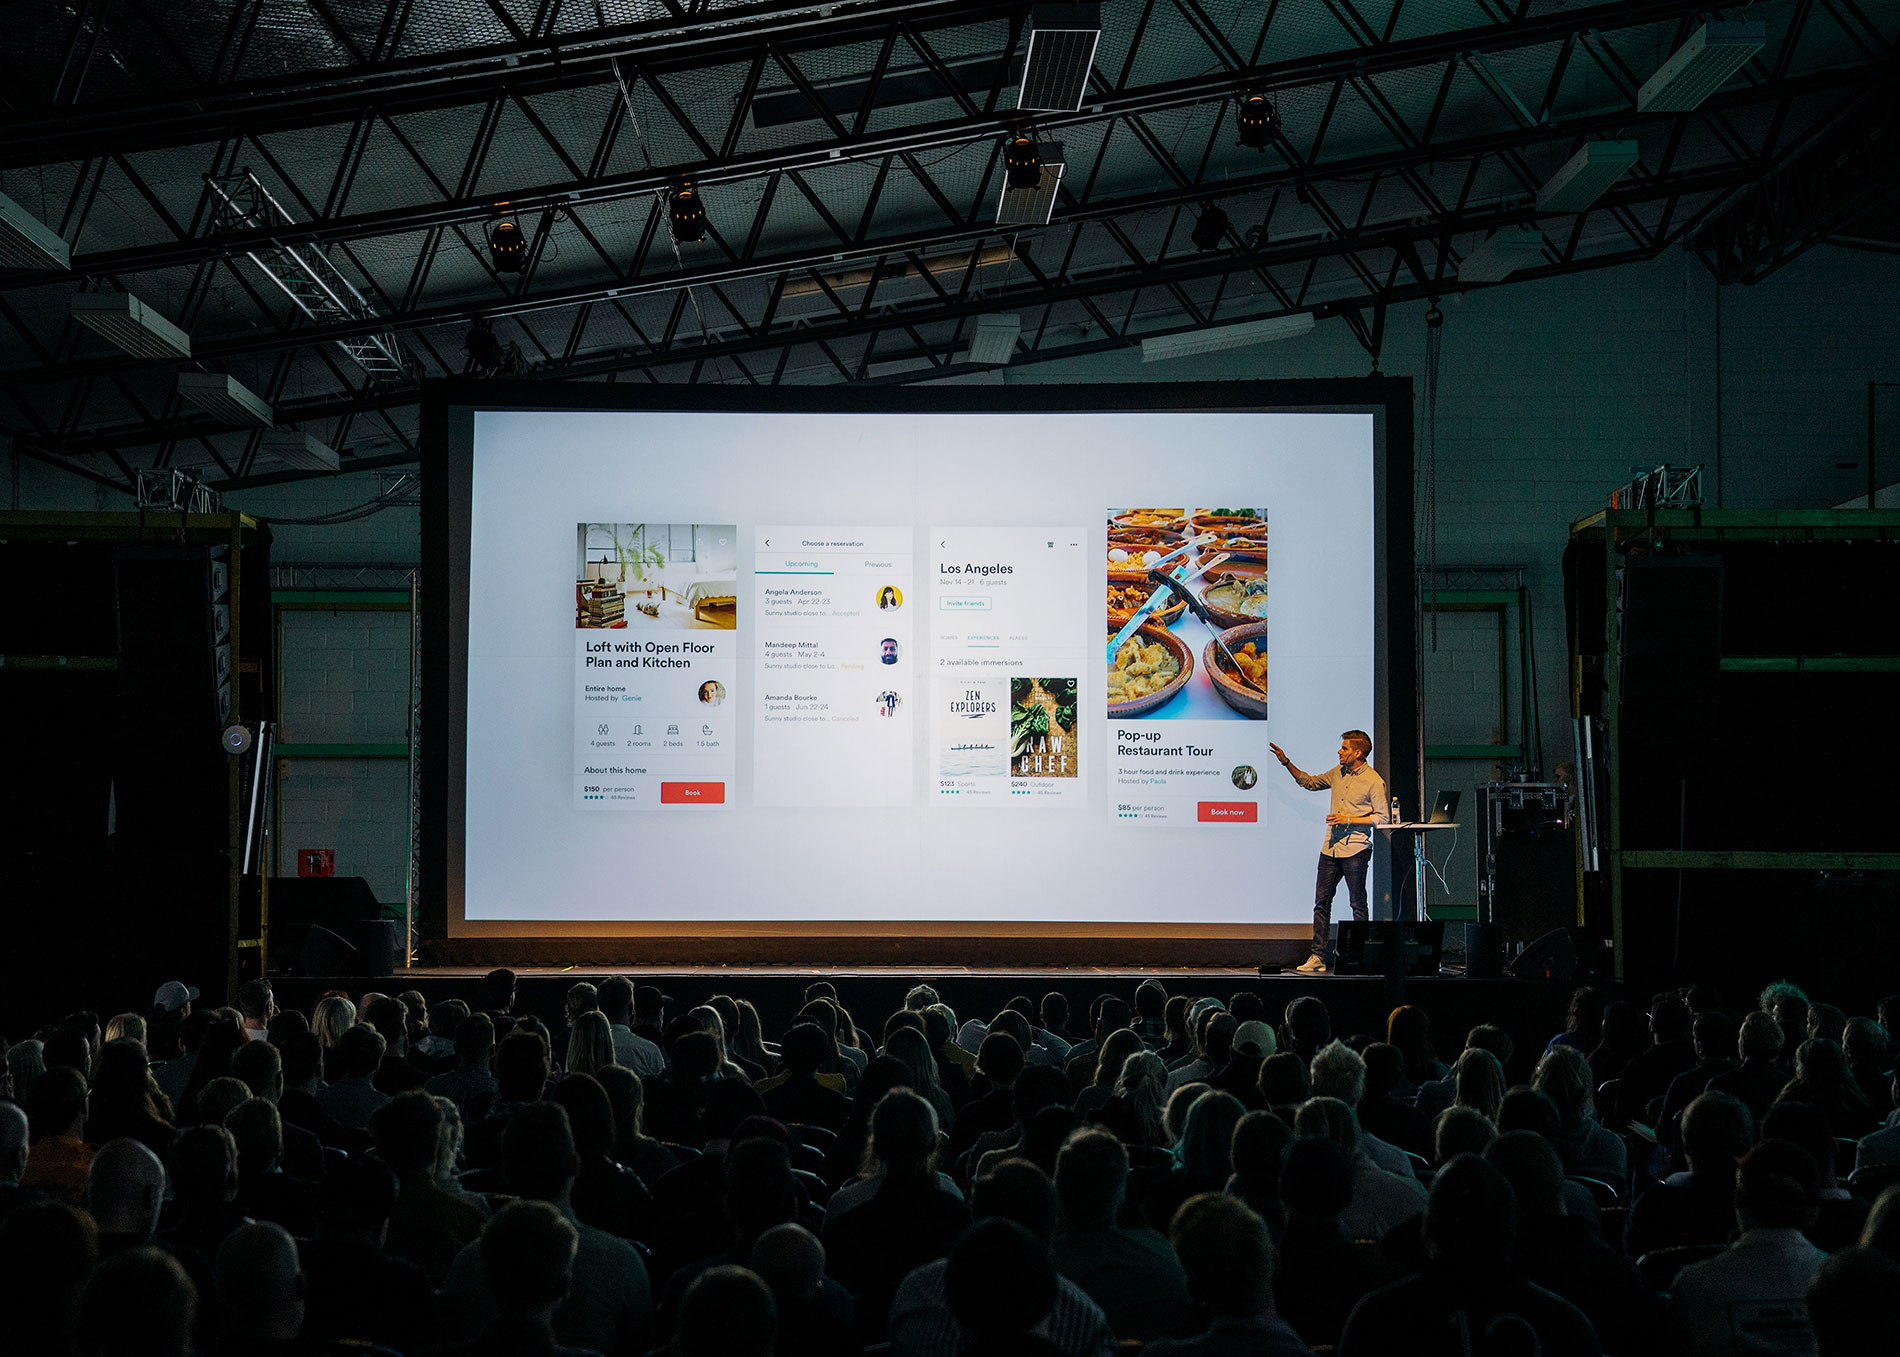 5 Creative Presentation Ideas from Top Sales Leaders